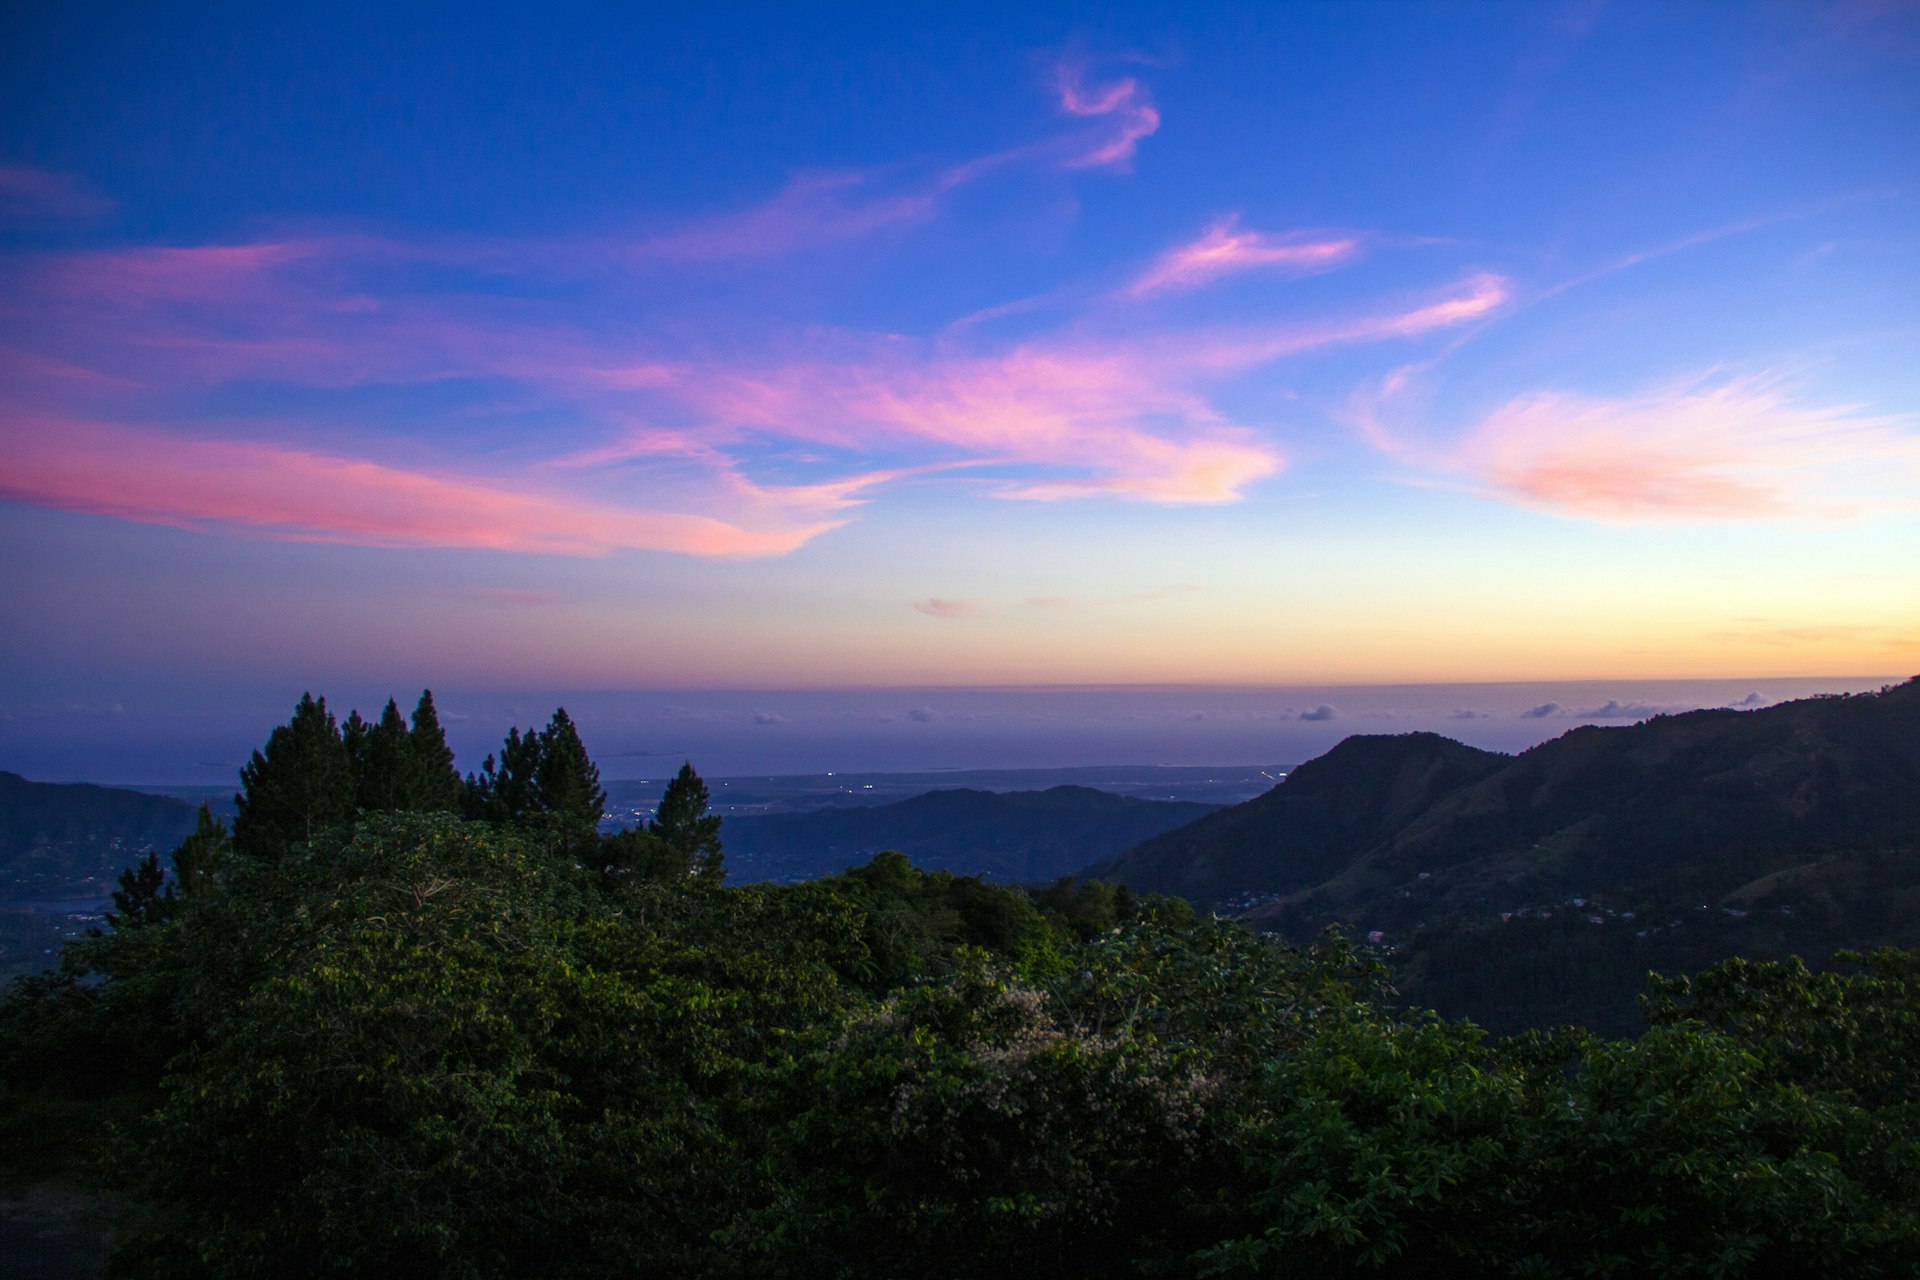 A violet-and-pink sunset view from Cordillera Central mountain range in Puerto Rico.